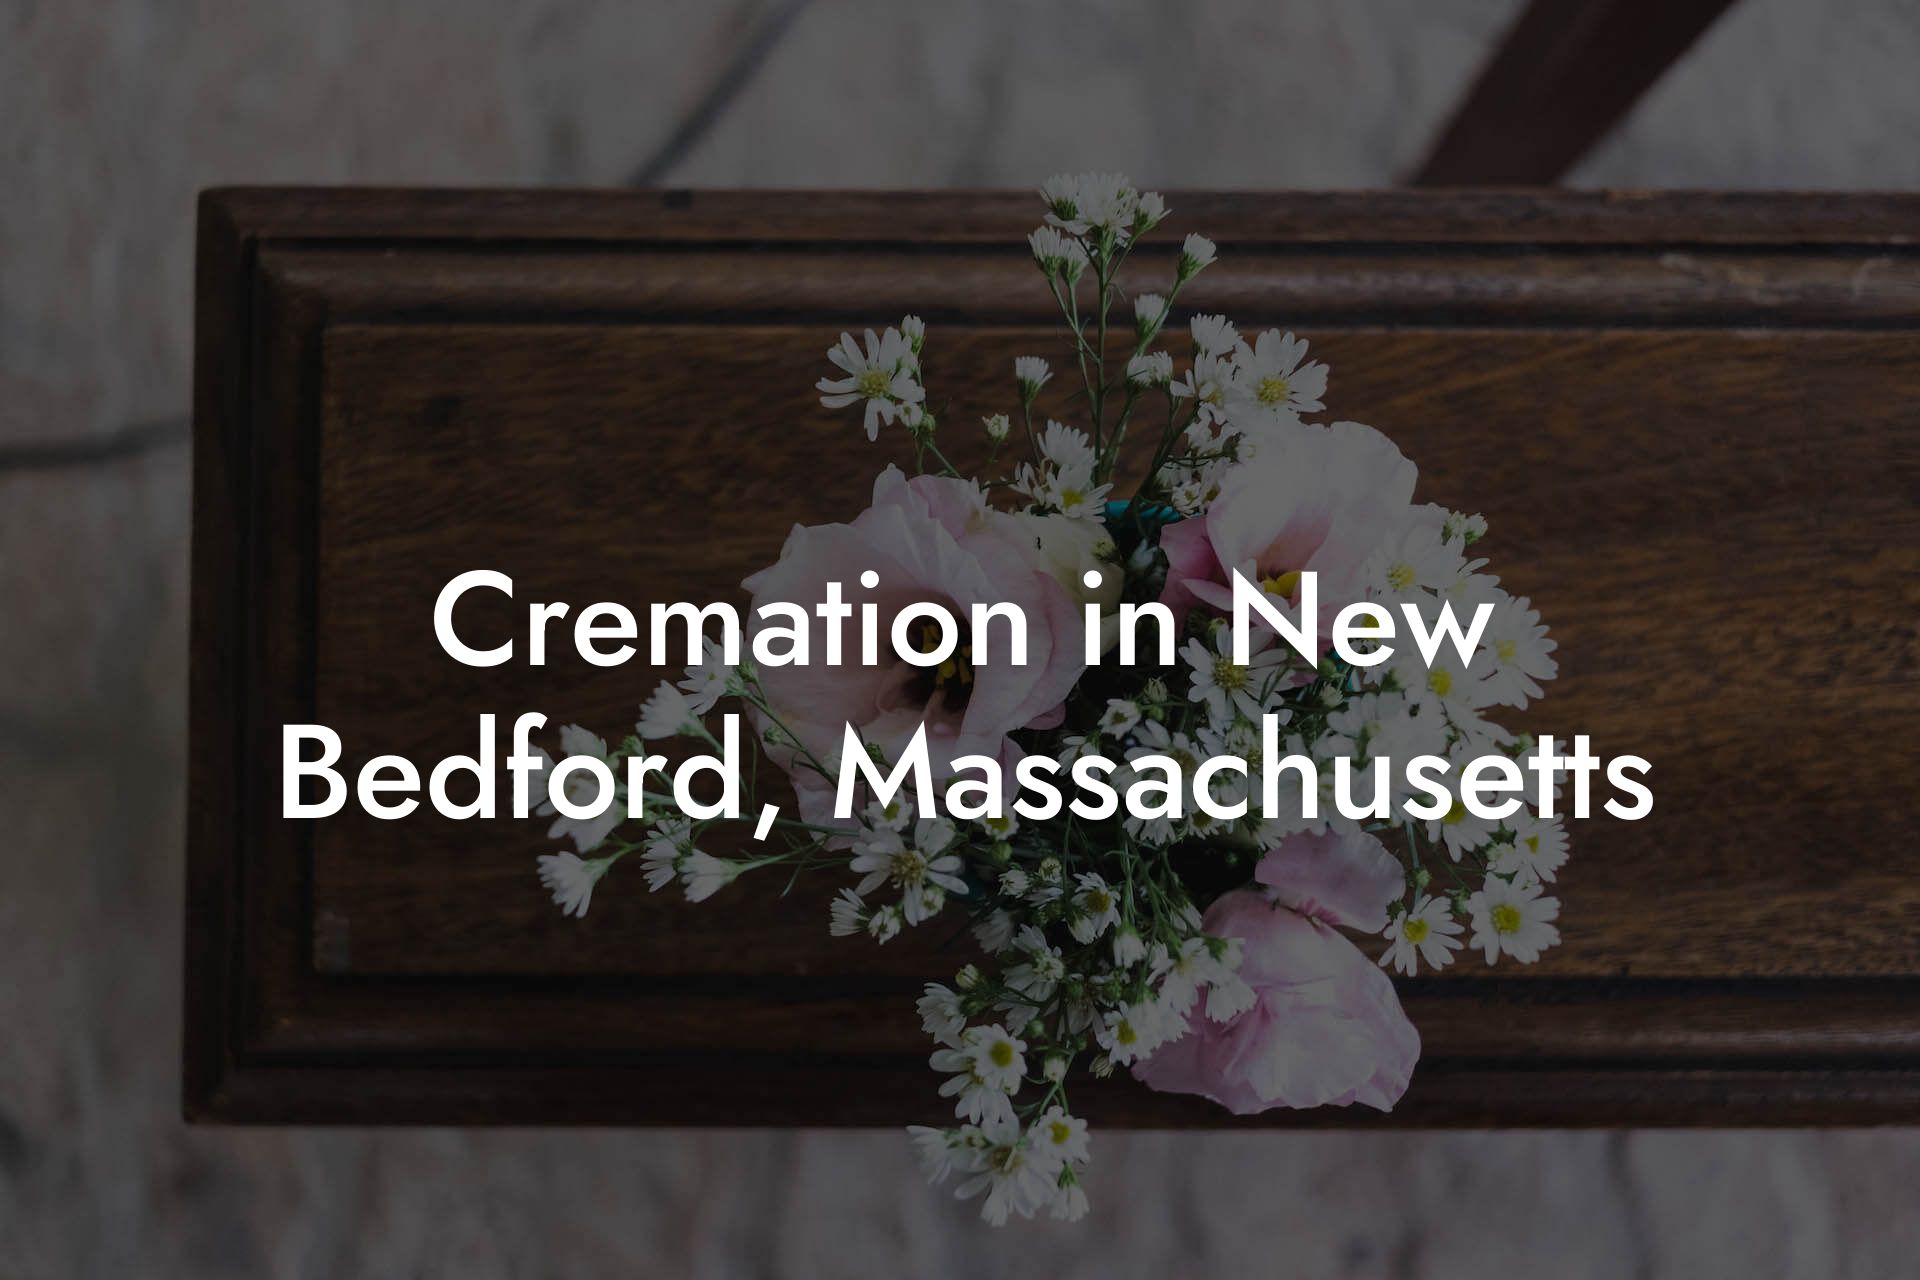 Cremation in New Bedford, Massachusetts